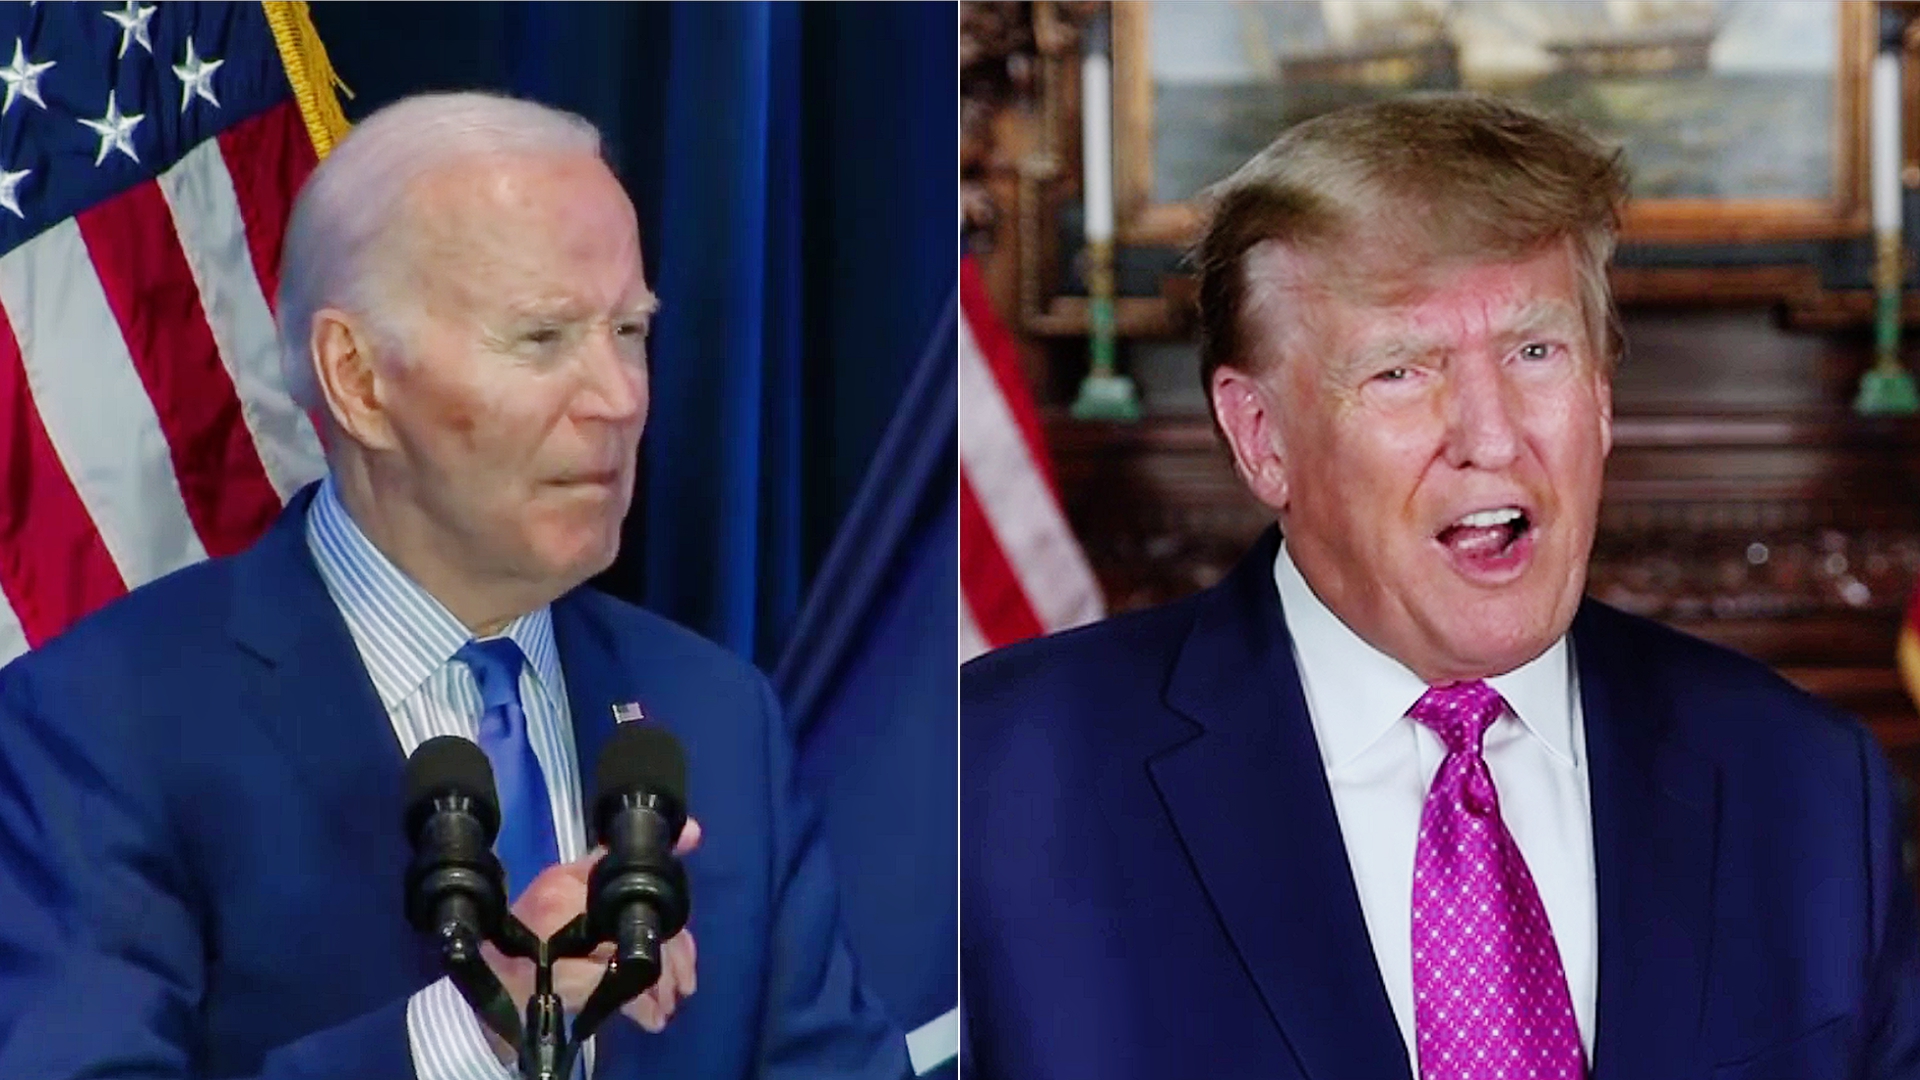 Biden Opens Lead On Trump Thanks To HUGE Lead With Women